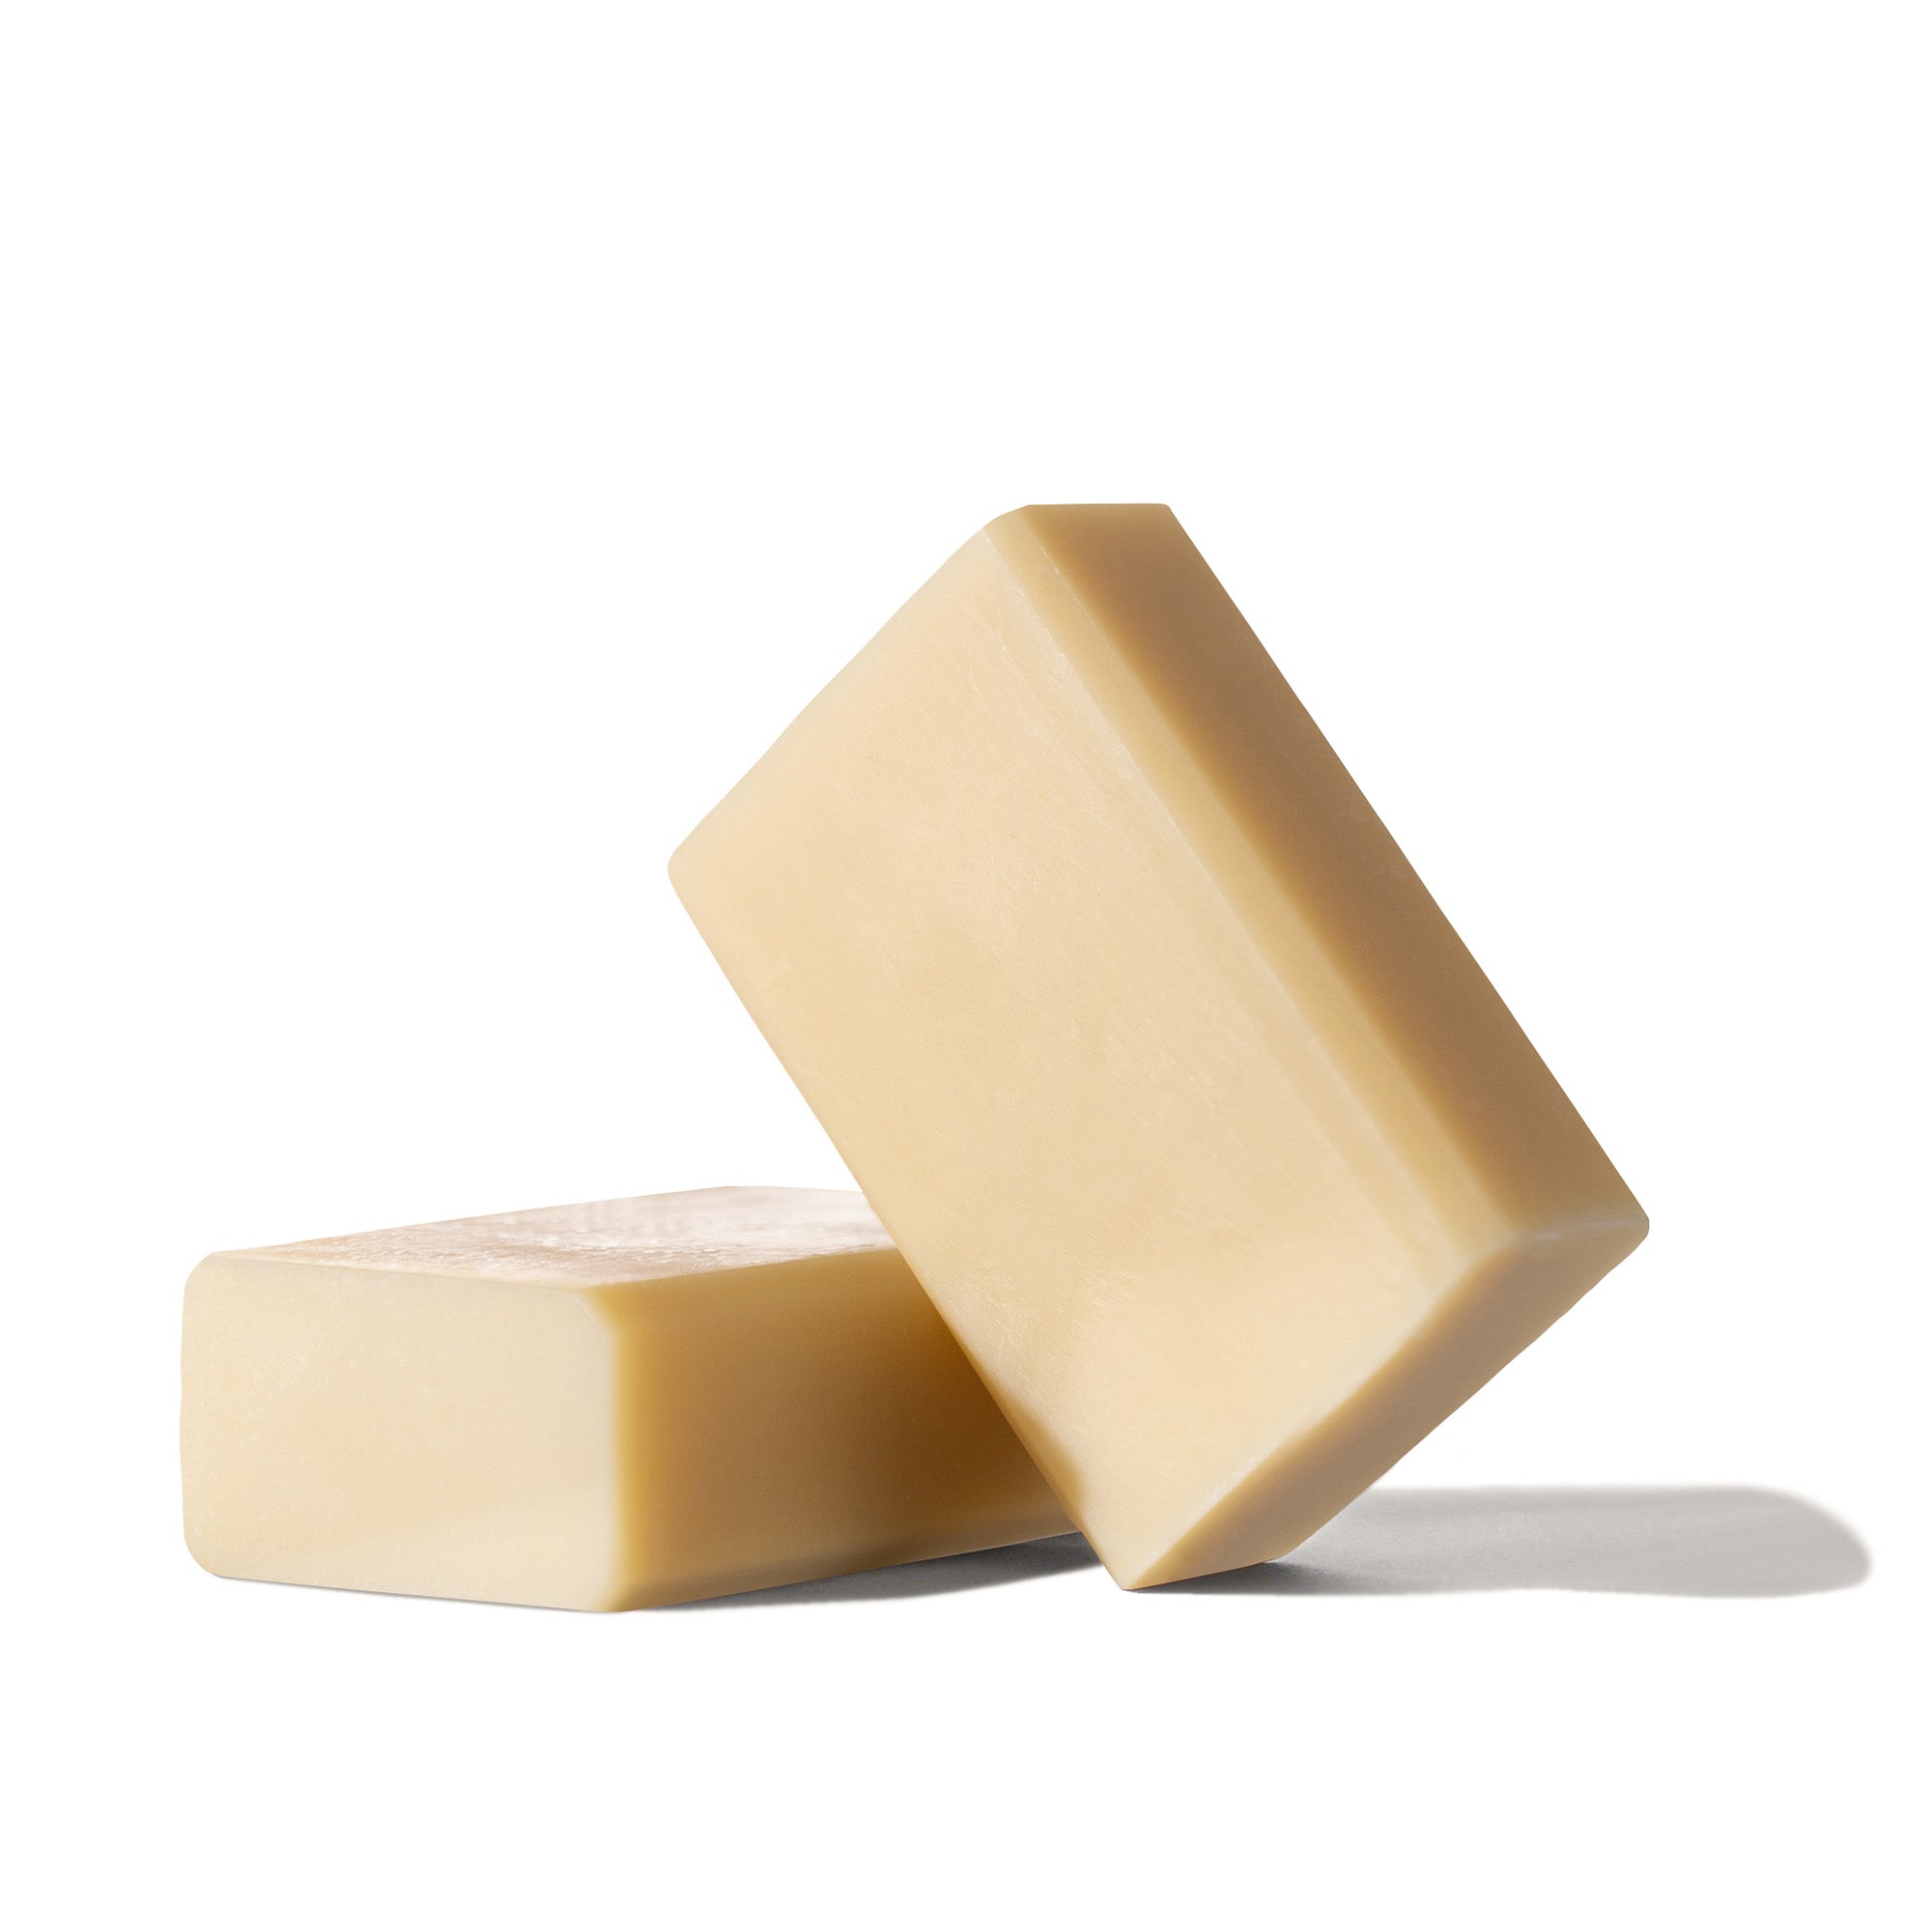 Image of a bar of Antü Refreshing bar soap stacked on top of another bar of soap.